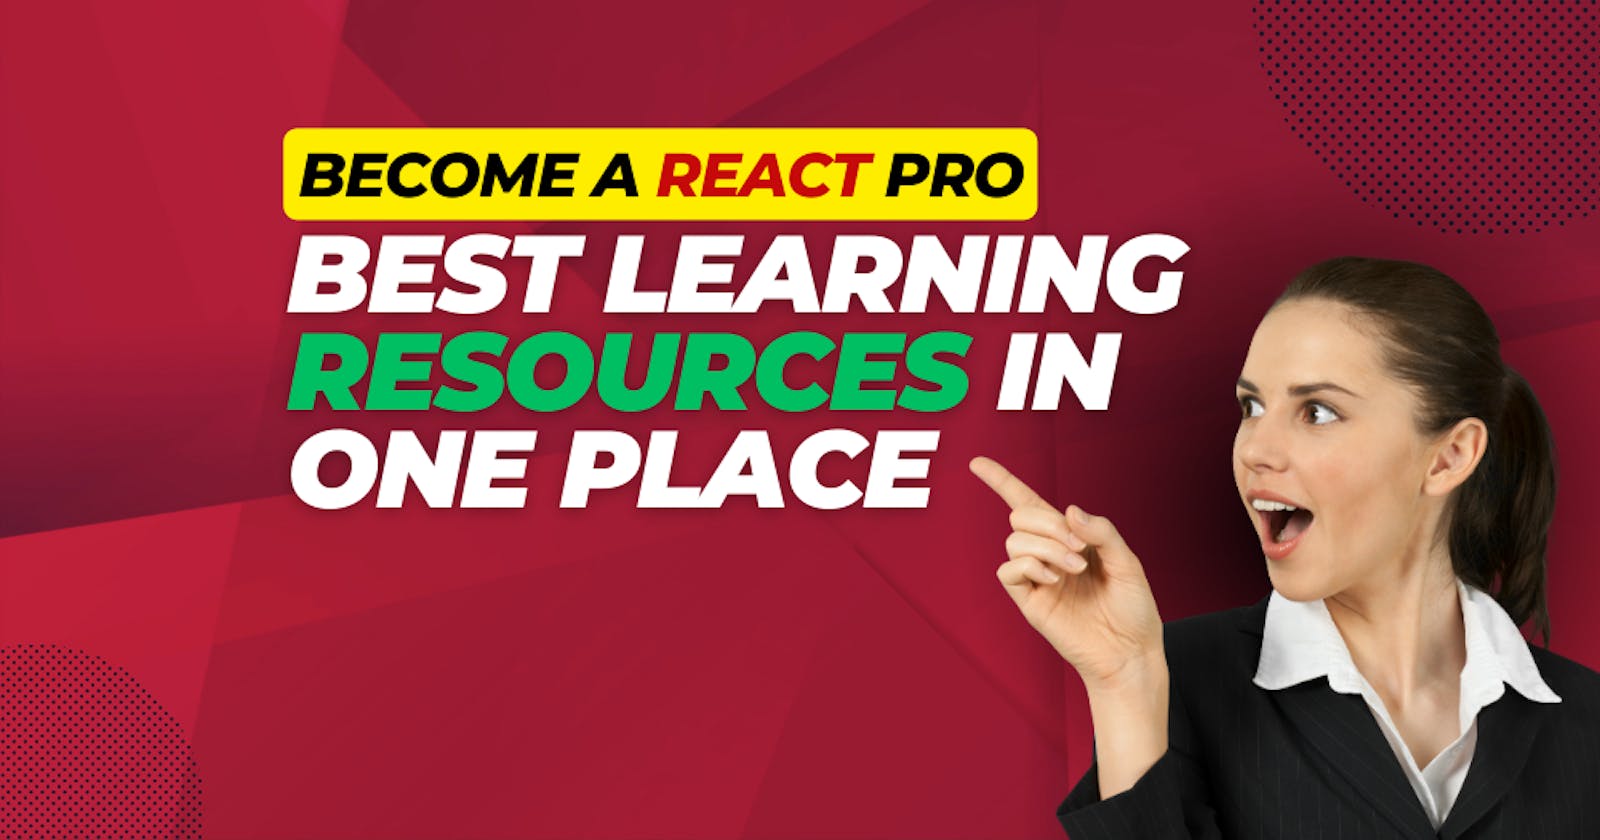 Becoming a React Pro || Best Learning Resources in One Place || 16 GitHub repositories